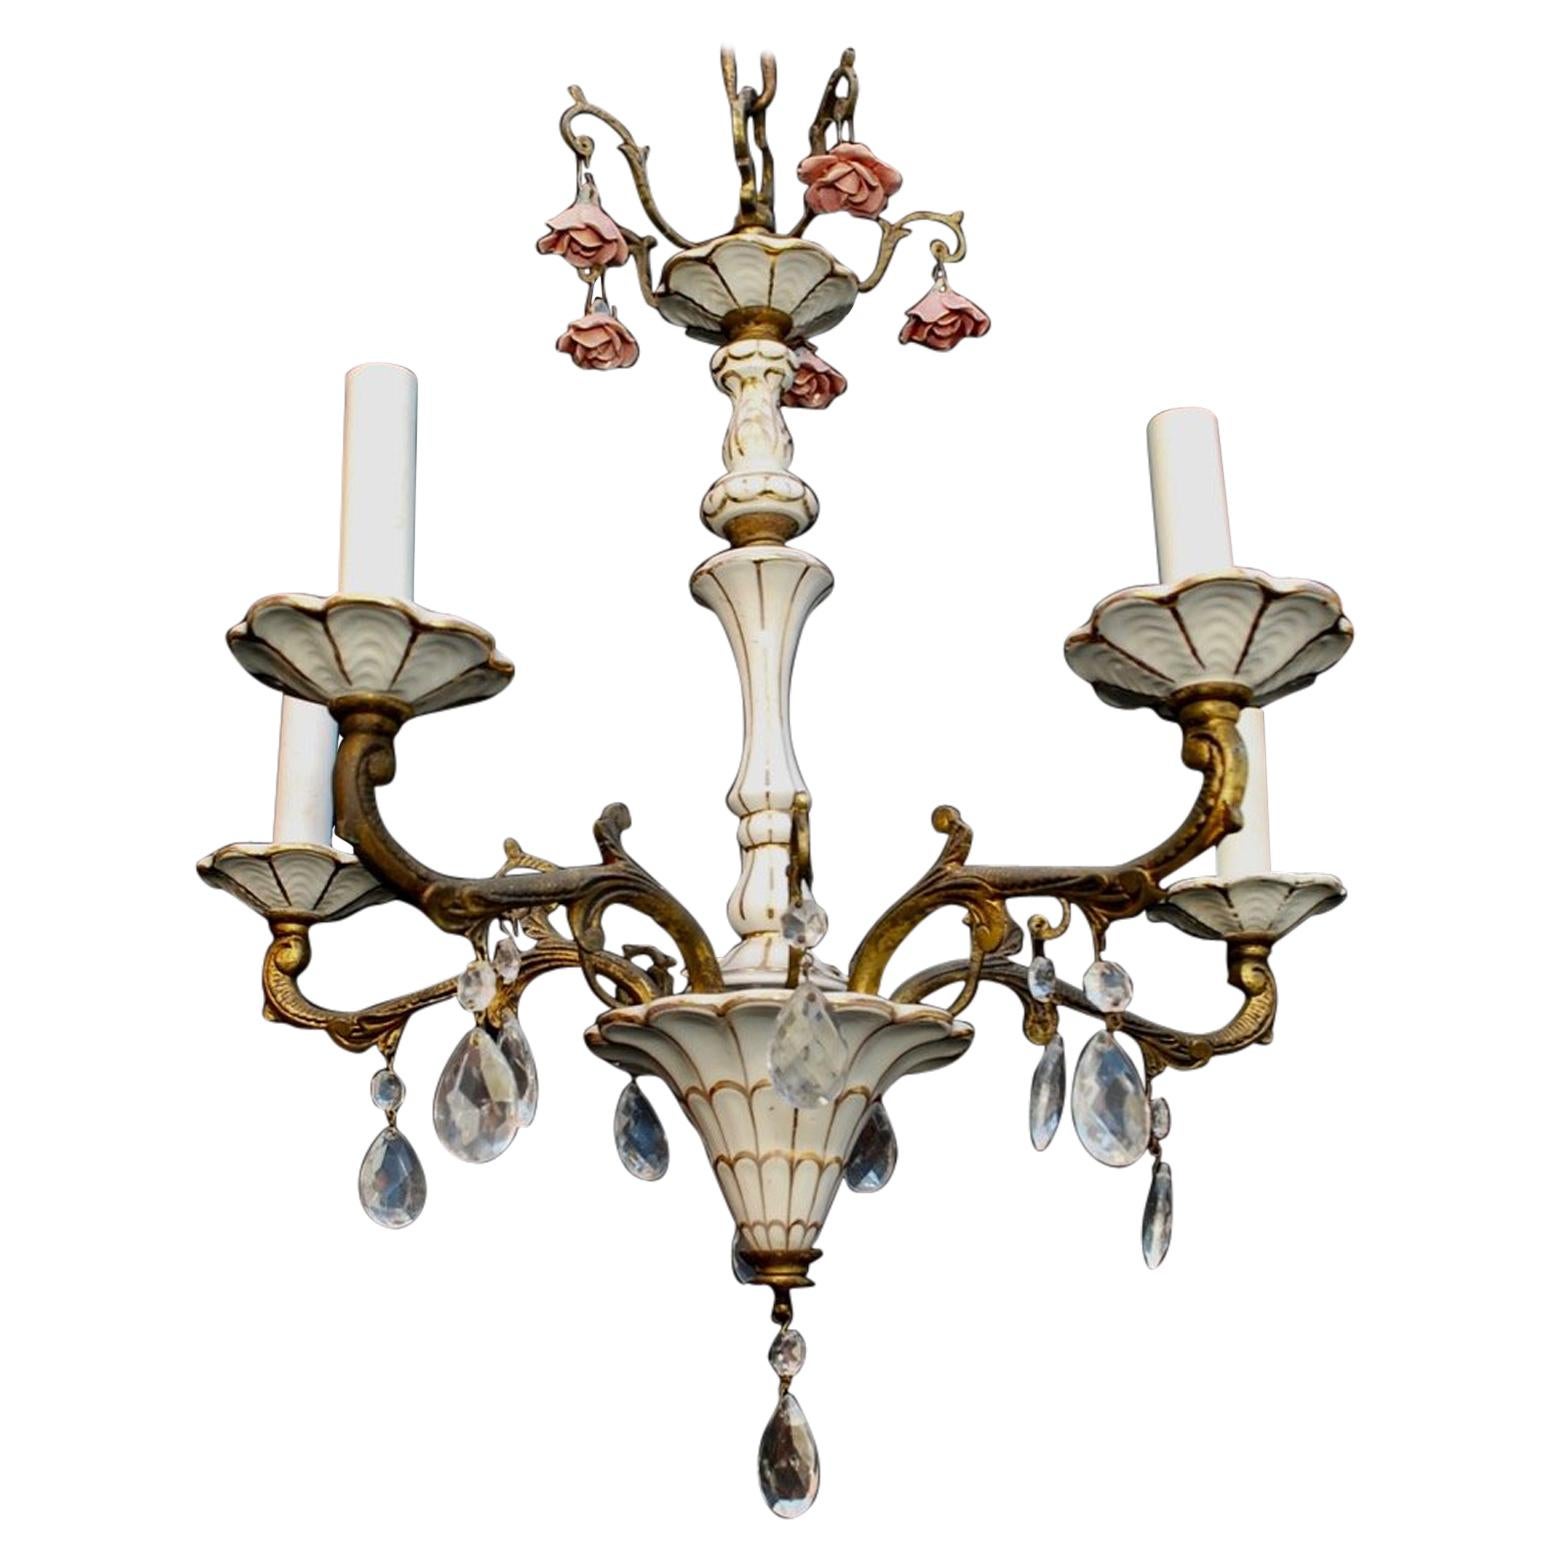 Beautiful 1940s Brass and Porcelain Chandelier from Spain